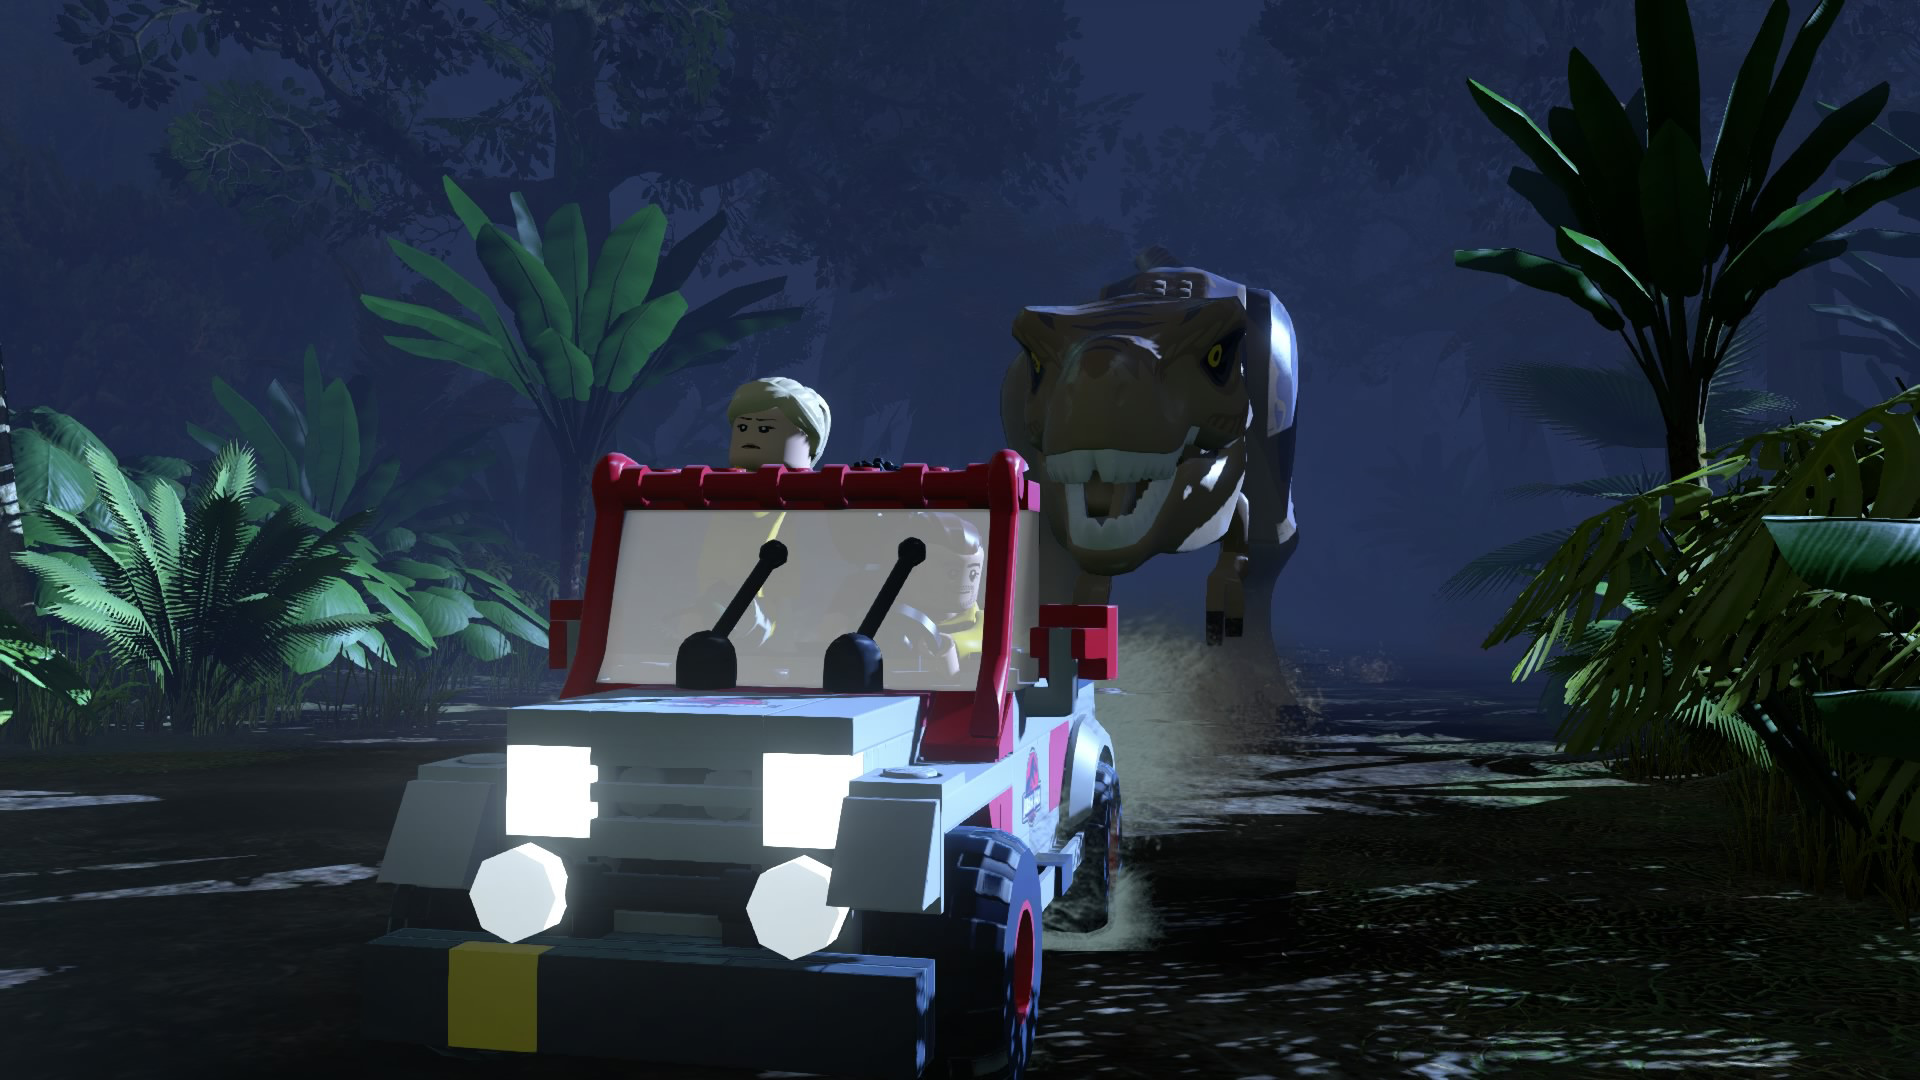 LEGO Jurassic World Game - LEGO Jurassic World Game could no longer be  contained! Download the app now for iOS and Android